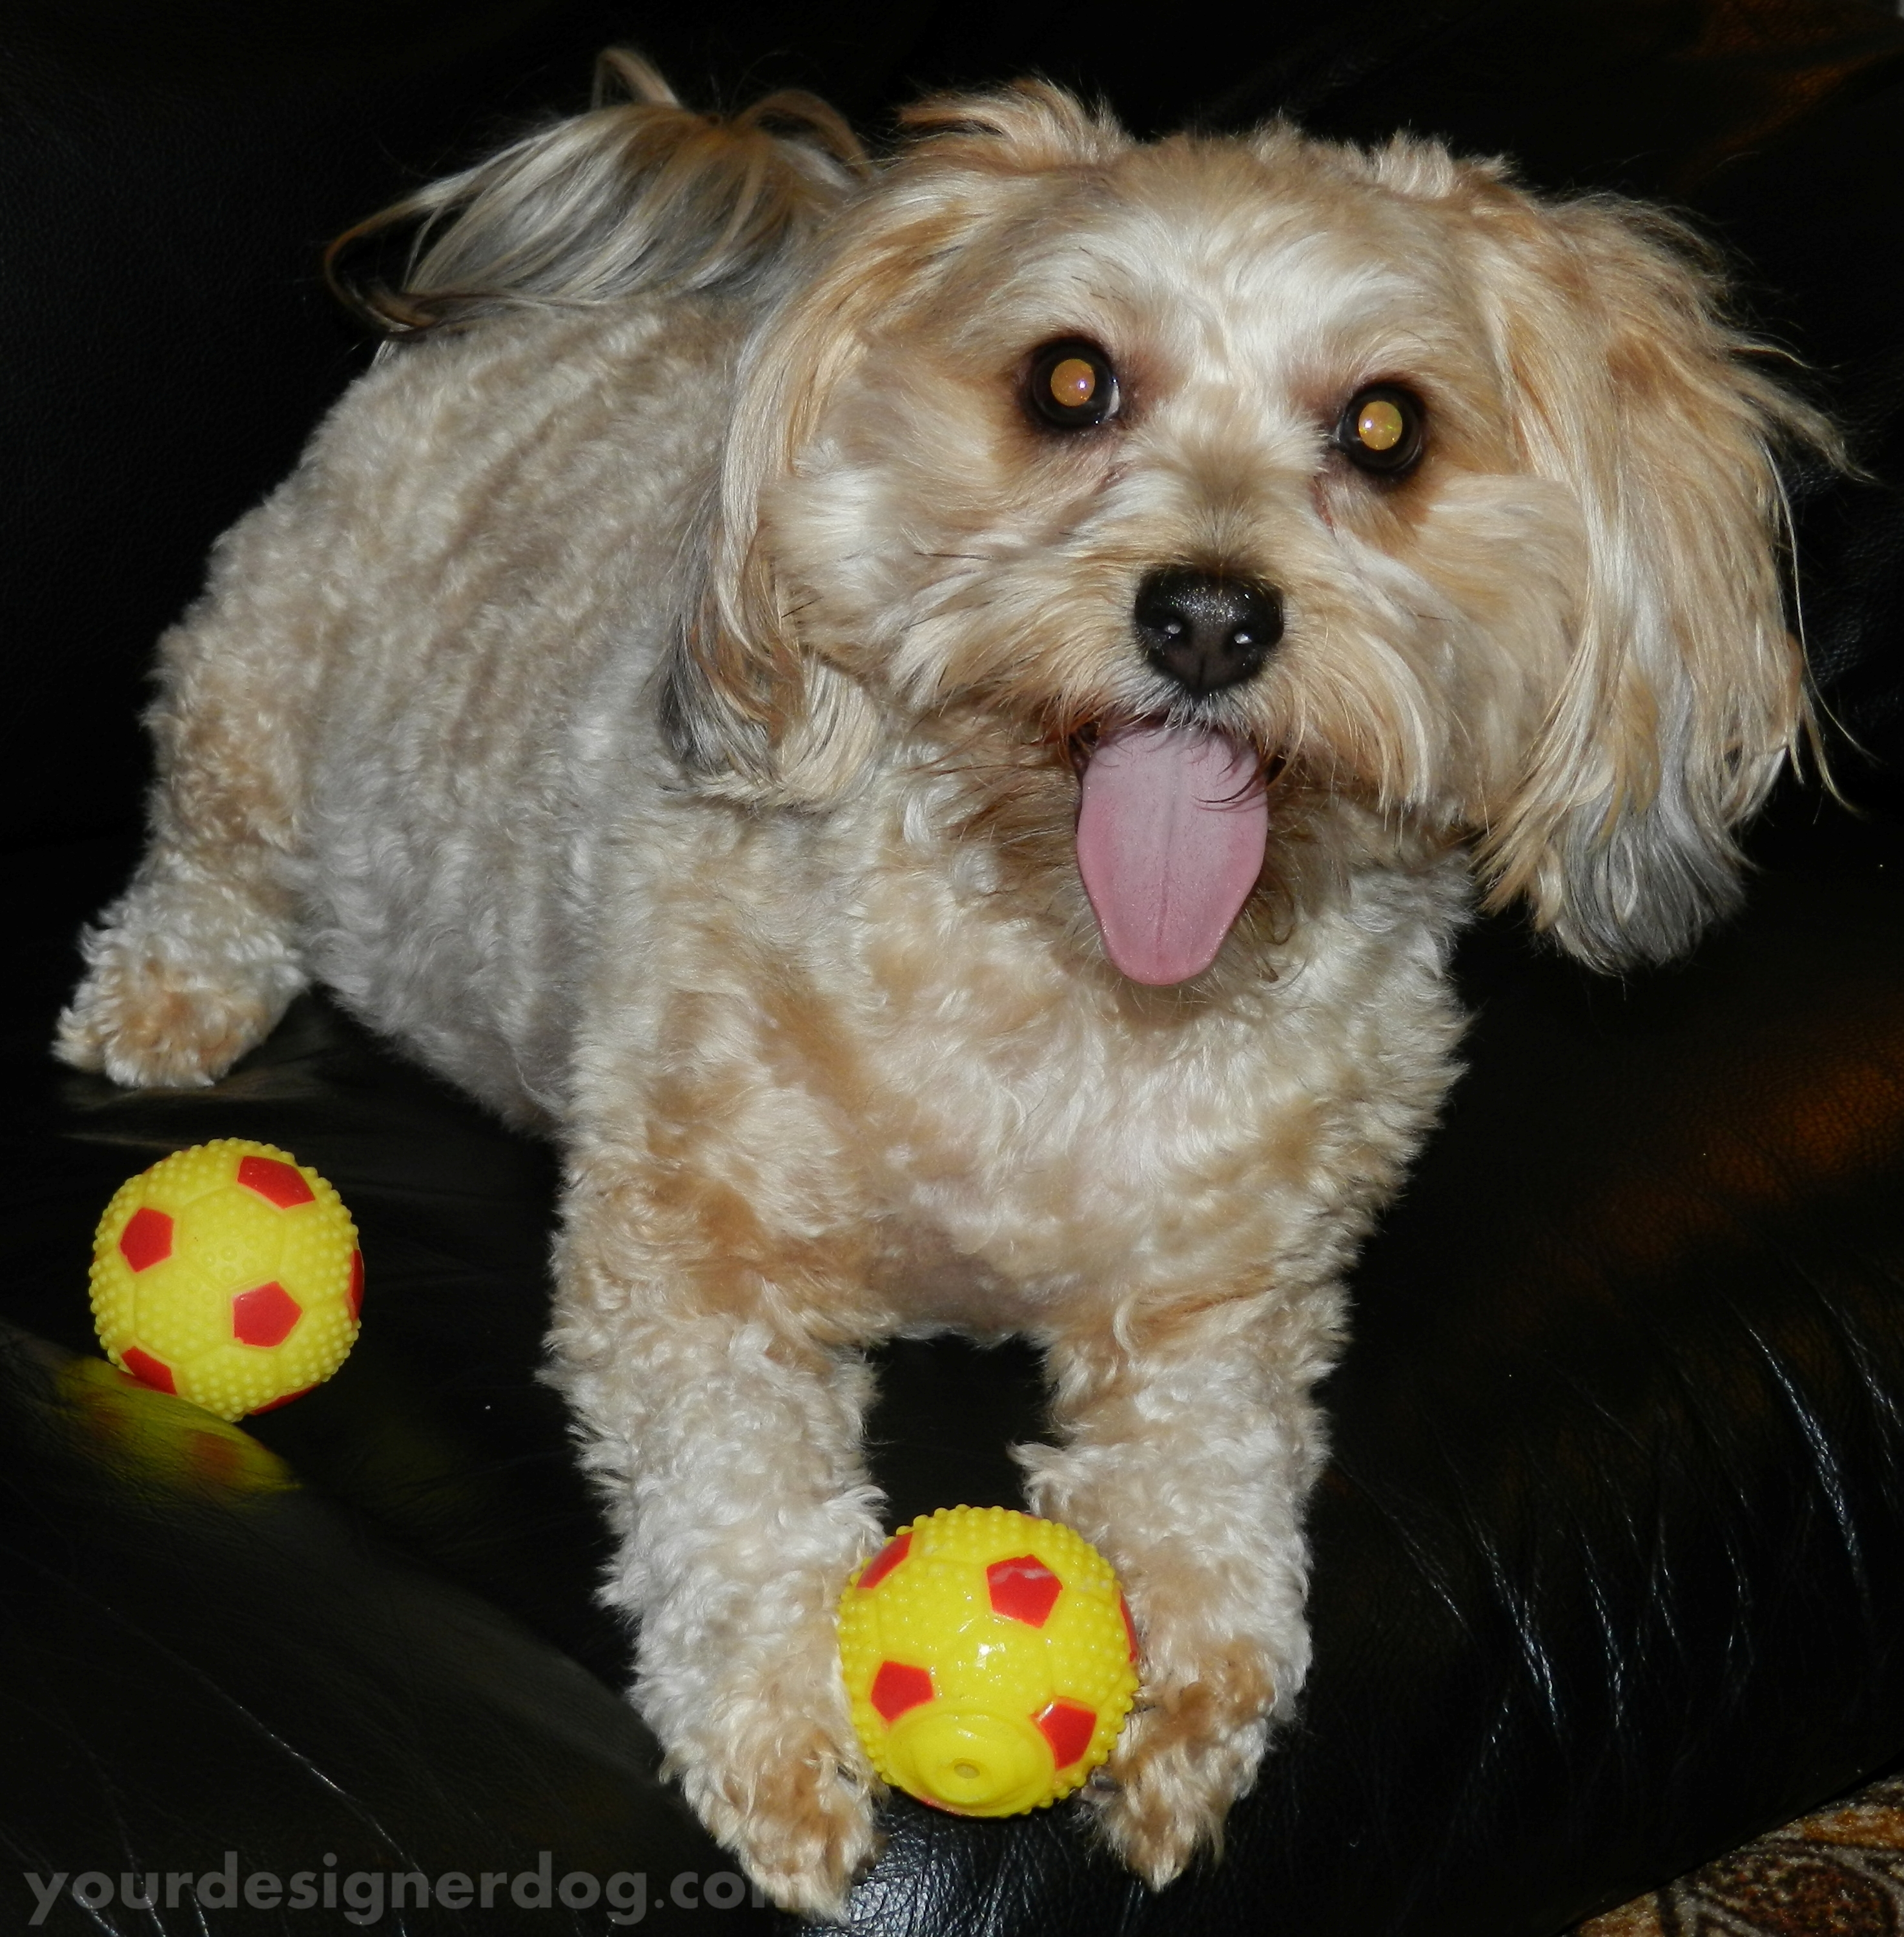 dogs, designer dogs, yorkipoo, yorkie poo, squeaky toy, ball